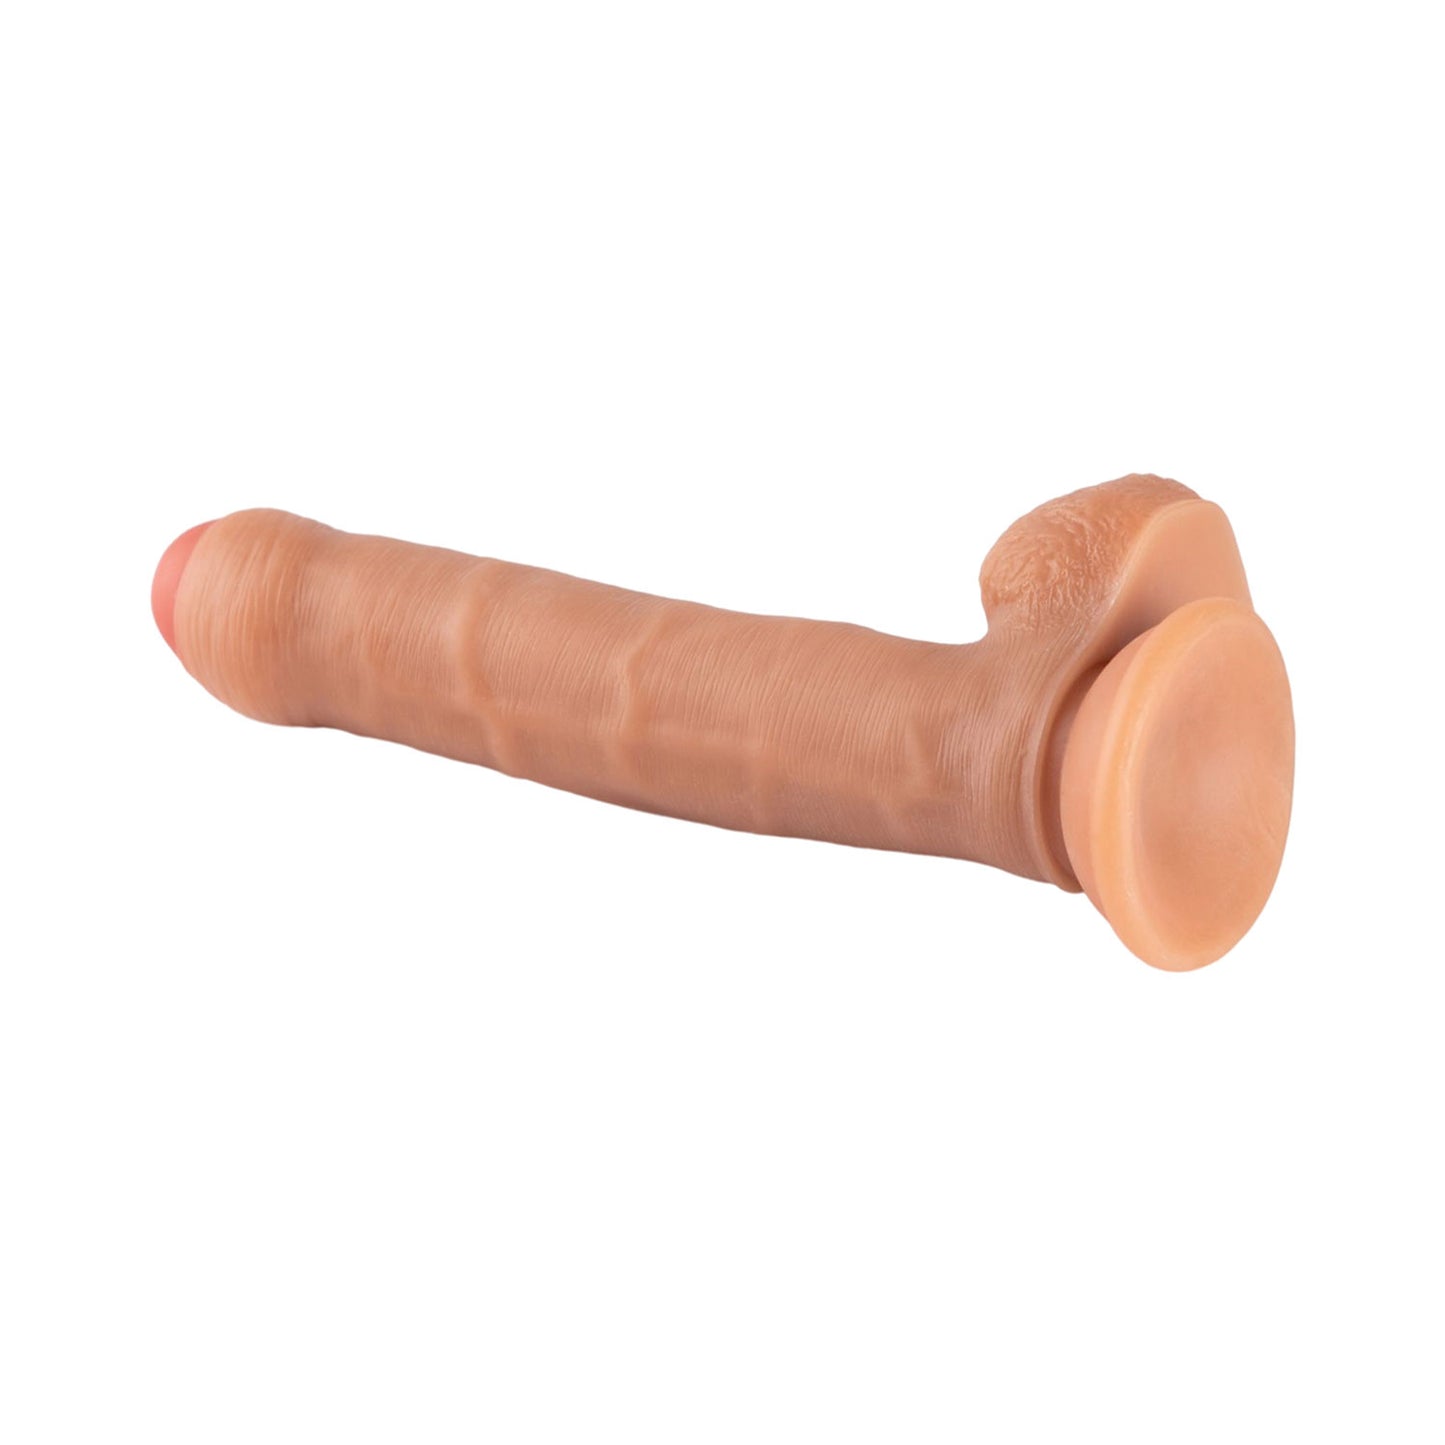 The Horny Company - No Frills Dildo 23cm x 3.6cm Suction Cup Uncut Dong